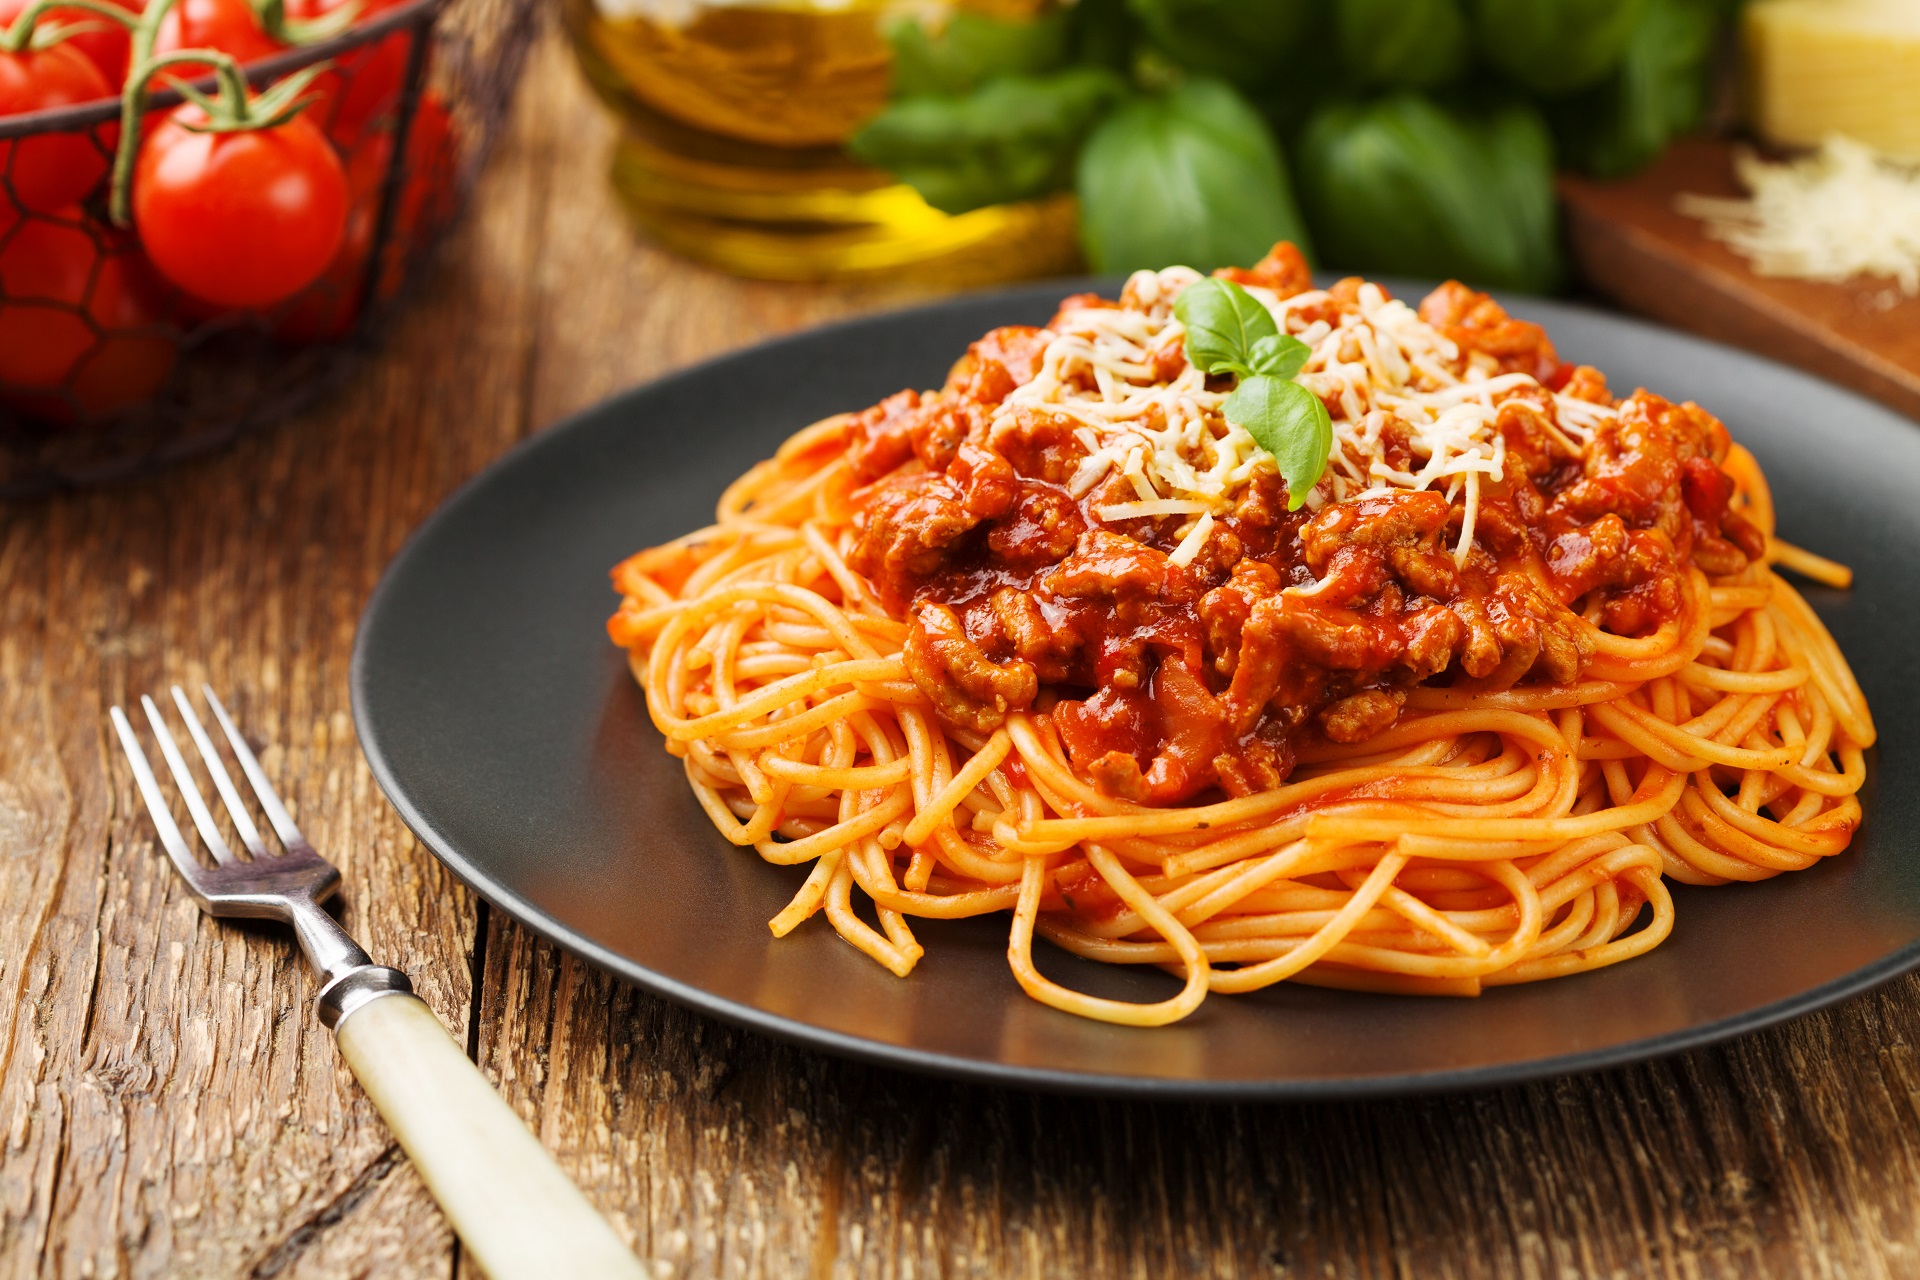 Spaghetti is a type of pasta. 